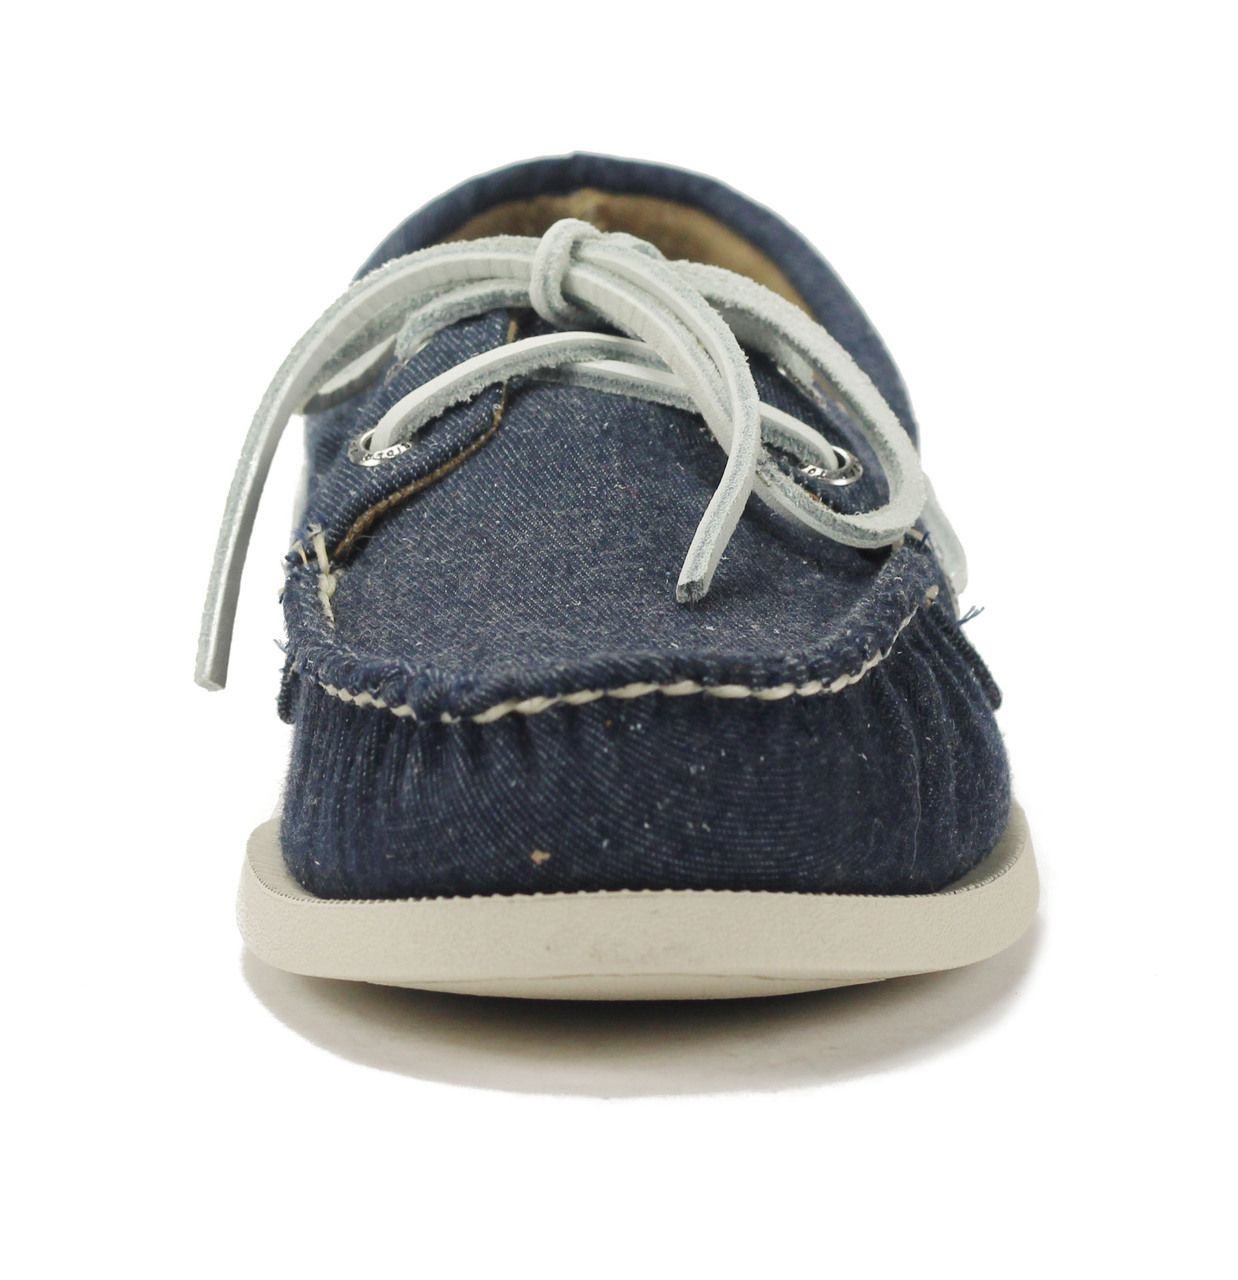 SPERRY TOP-SIDER Sperry Topsider for Men: A/O 2 Eye Soft Canvas Boat ...